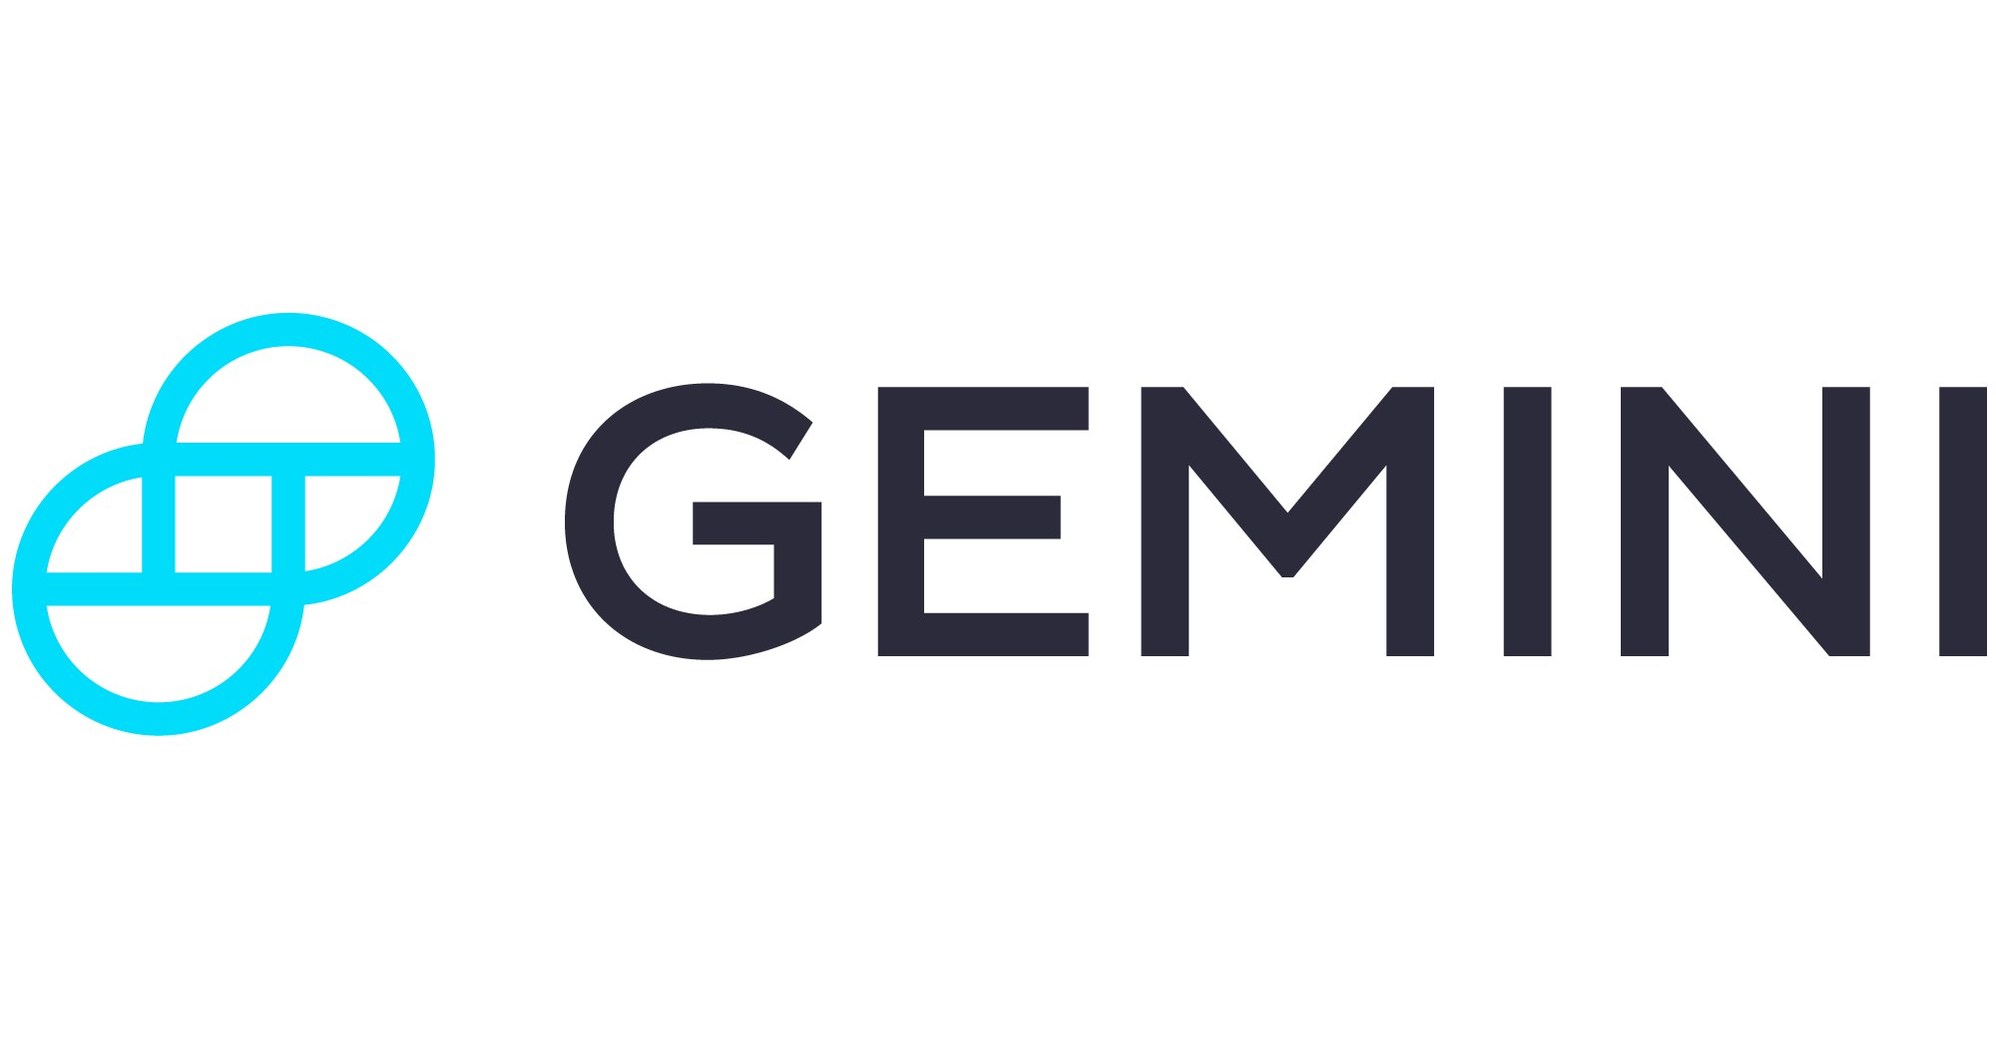 Gemini bitcoin canada escort wants crypto currency as payment